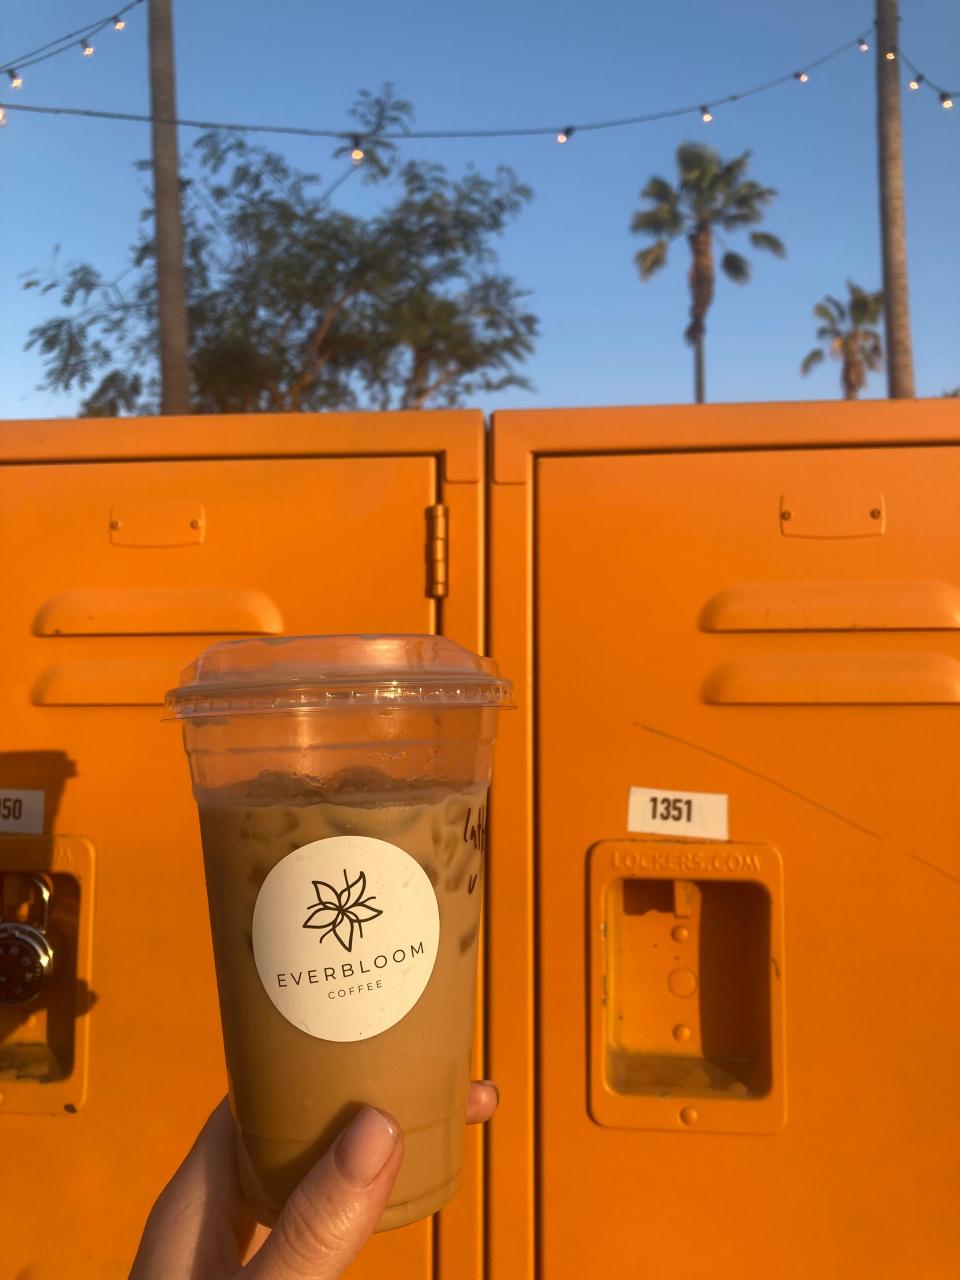 An iced latte from Everbloom.